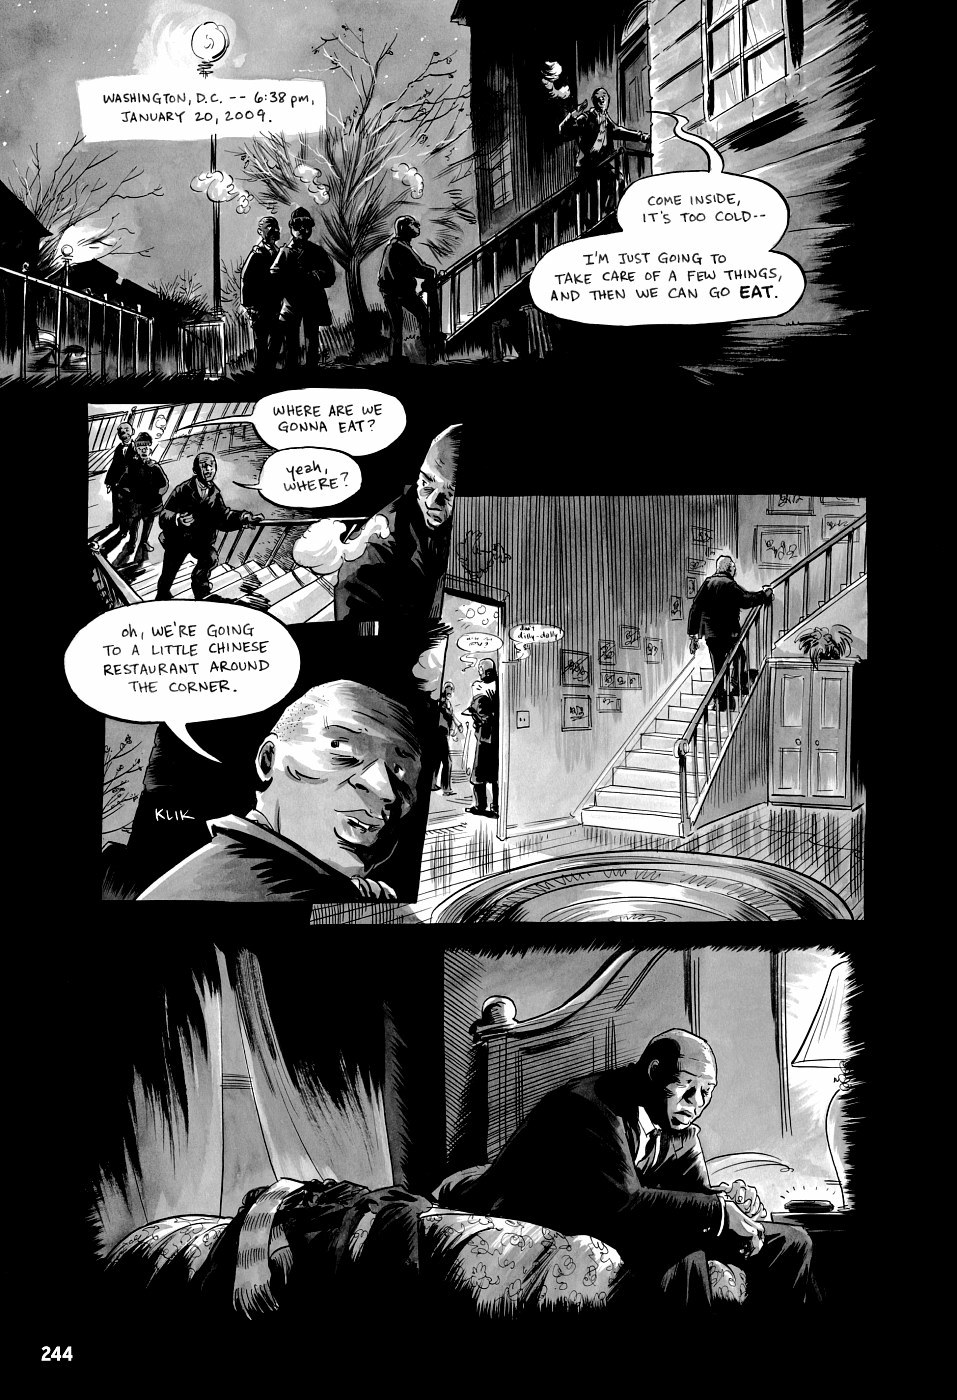 page 244 of march book three graphic novel